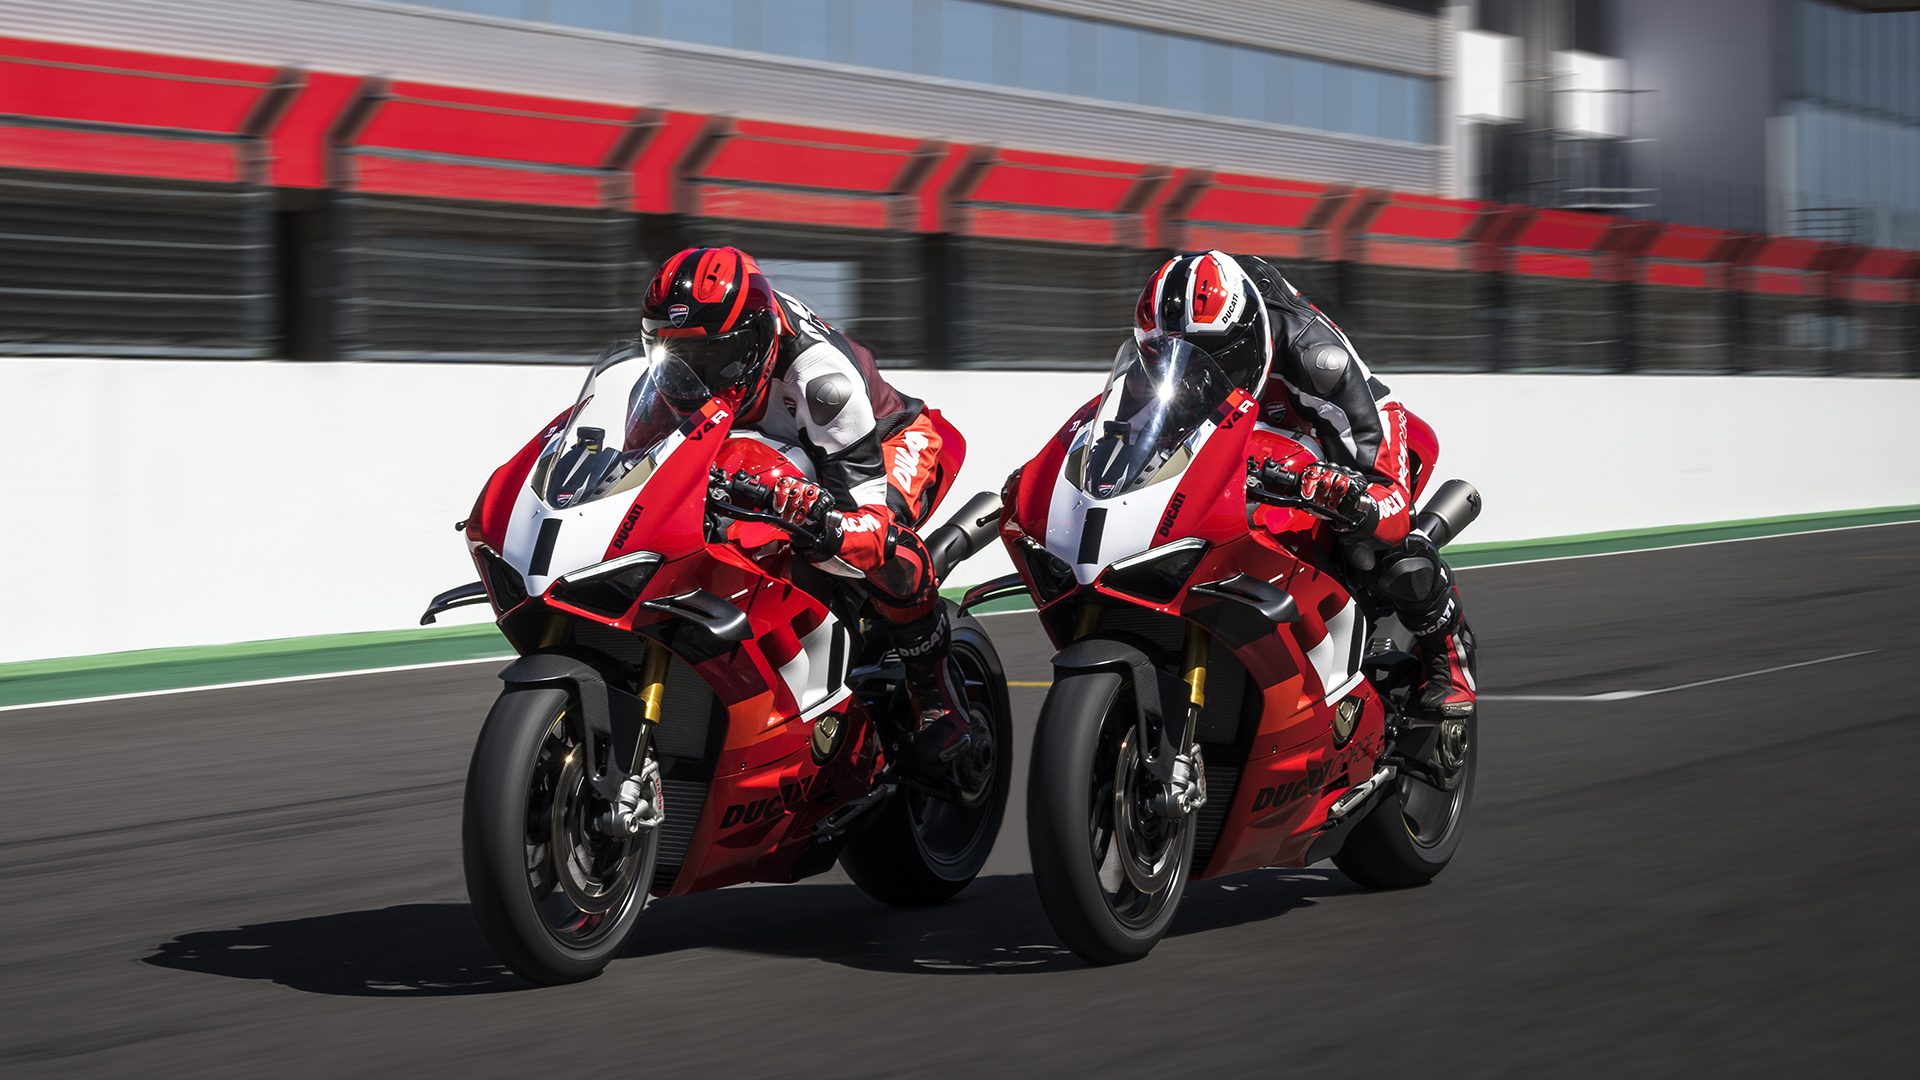 2022 Ducati Panigale V4 R's side by side on track